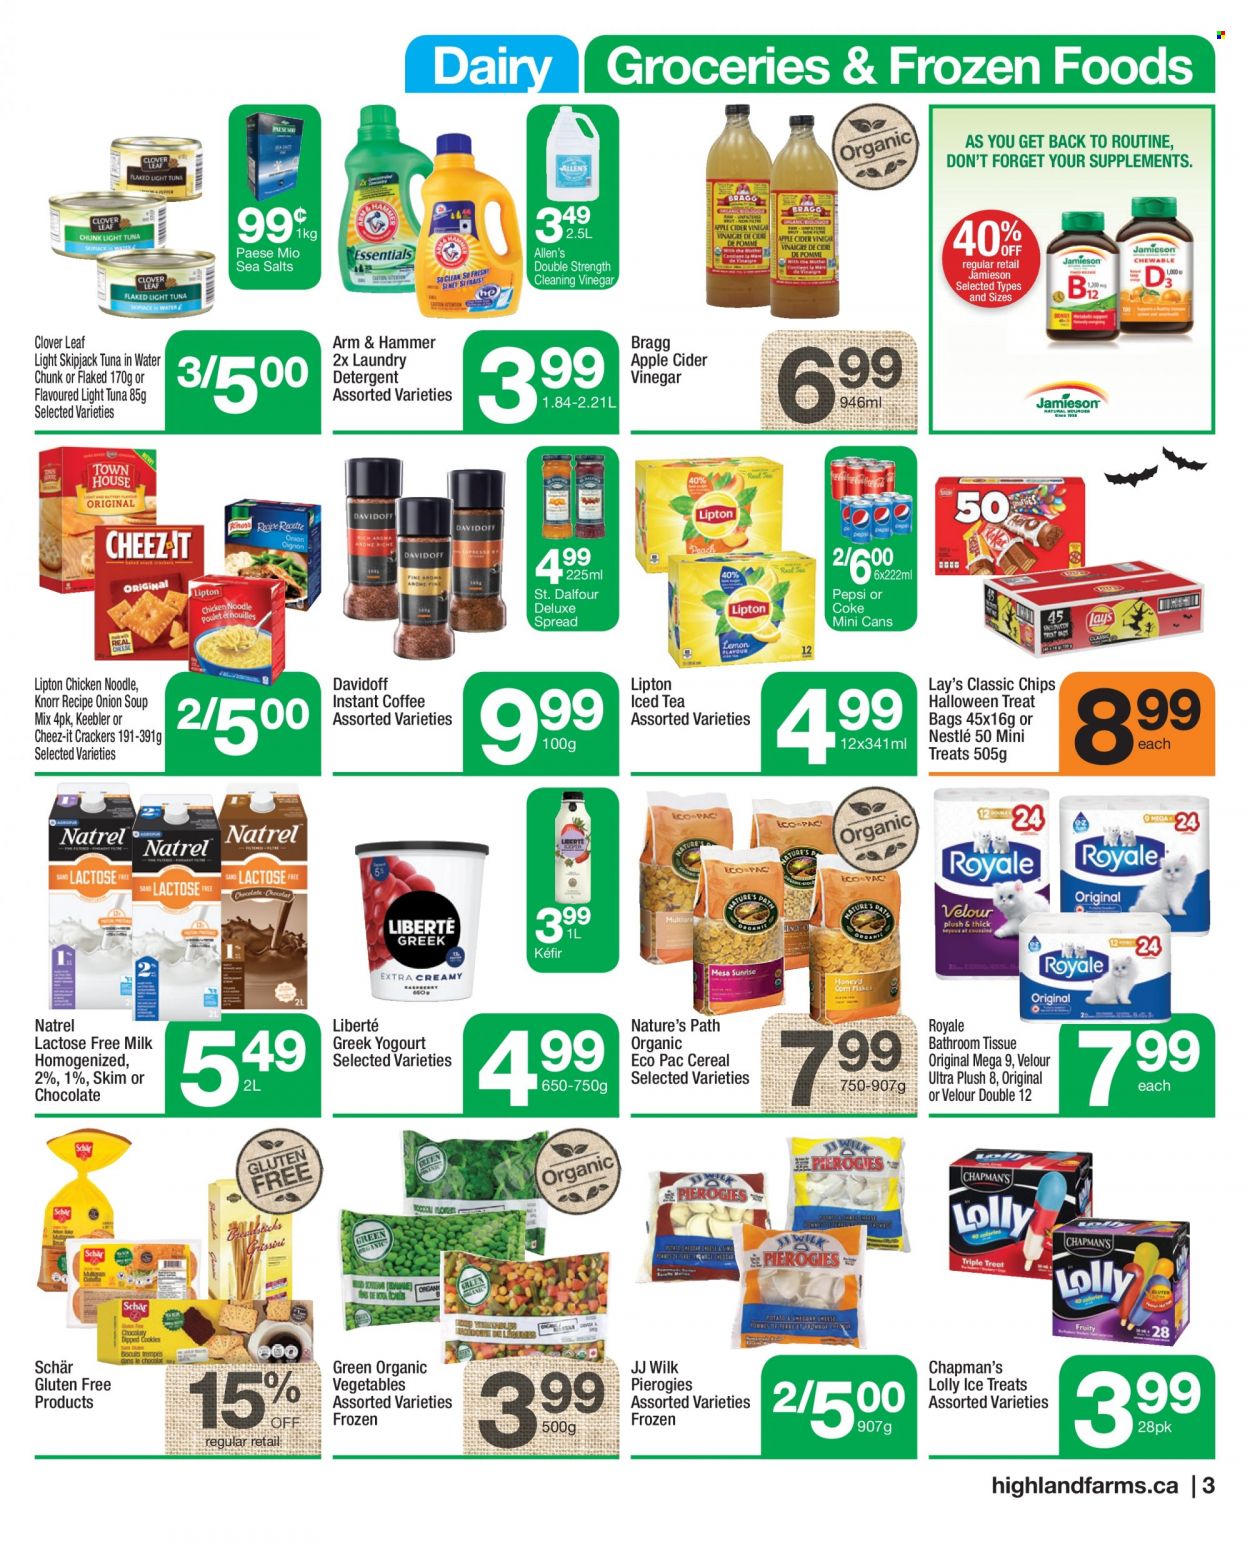 thumbnail - Highland Farms Flyer - October 21, 2021 - October 27, 2021 - Sales products - tuna, onion soup, soup mix, soup, noodles, Clover, milk, lactose free milk, kefir, chocolate, crackers, lollipop, Keebler, Lay’s, Cheez-It, ARM & HAMMER, tuna in water, light tuna, cereals, apple cider vinegar, Coca-Cola, Pepsi, ice tea, instant coffee, Davidoff, Knorr, Nestlé, Lipton. Page 3.